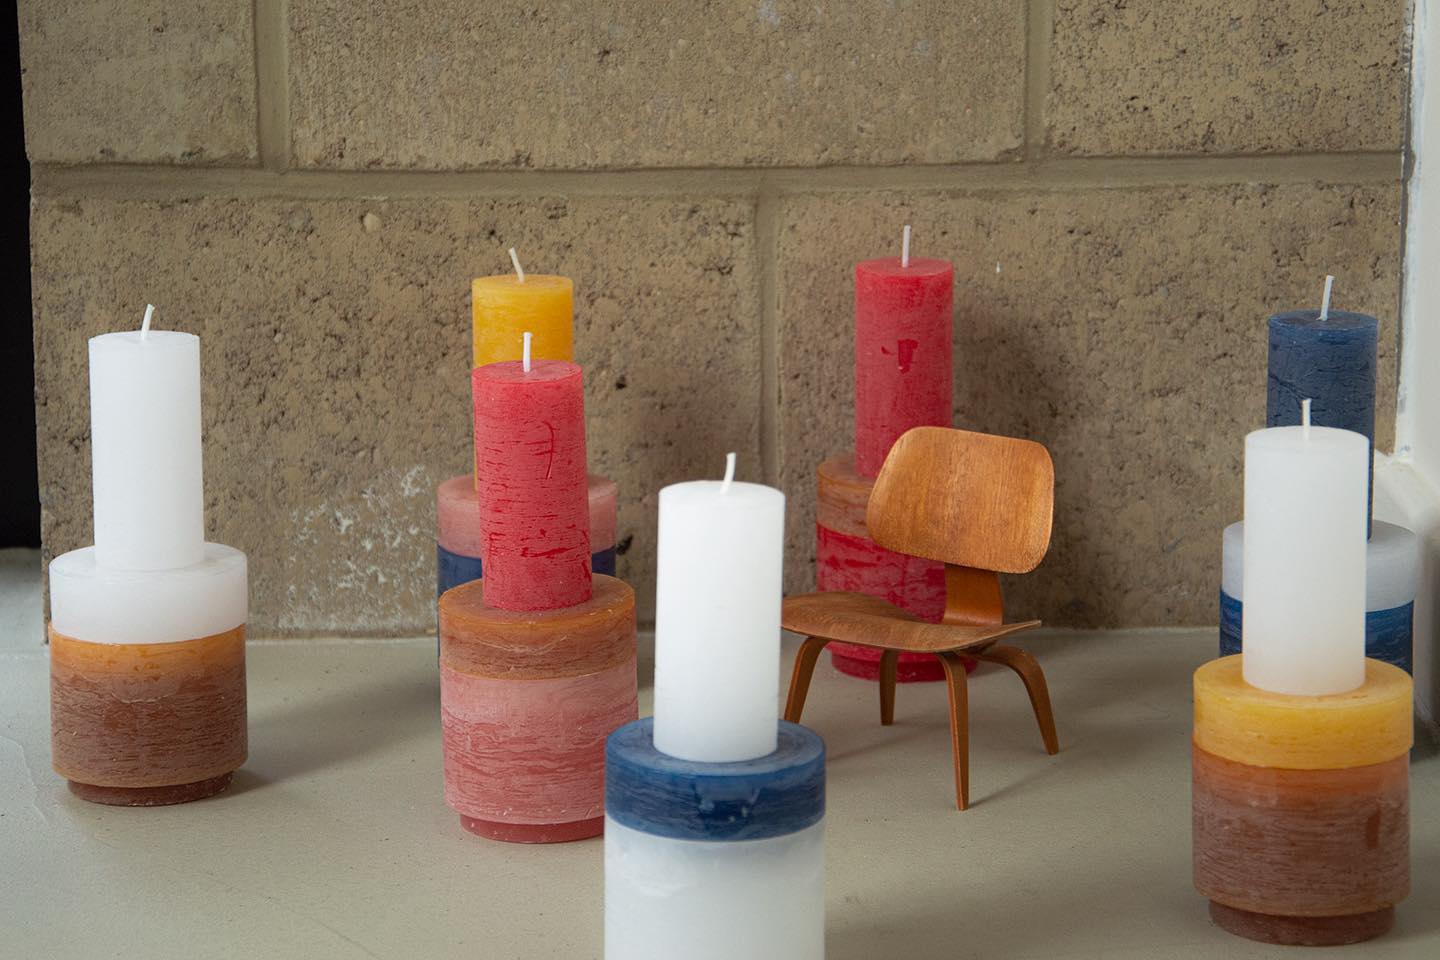 Candle Stack 02 (Red)